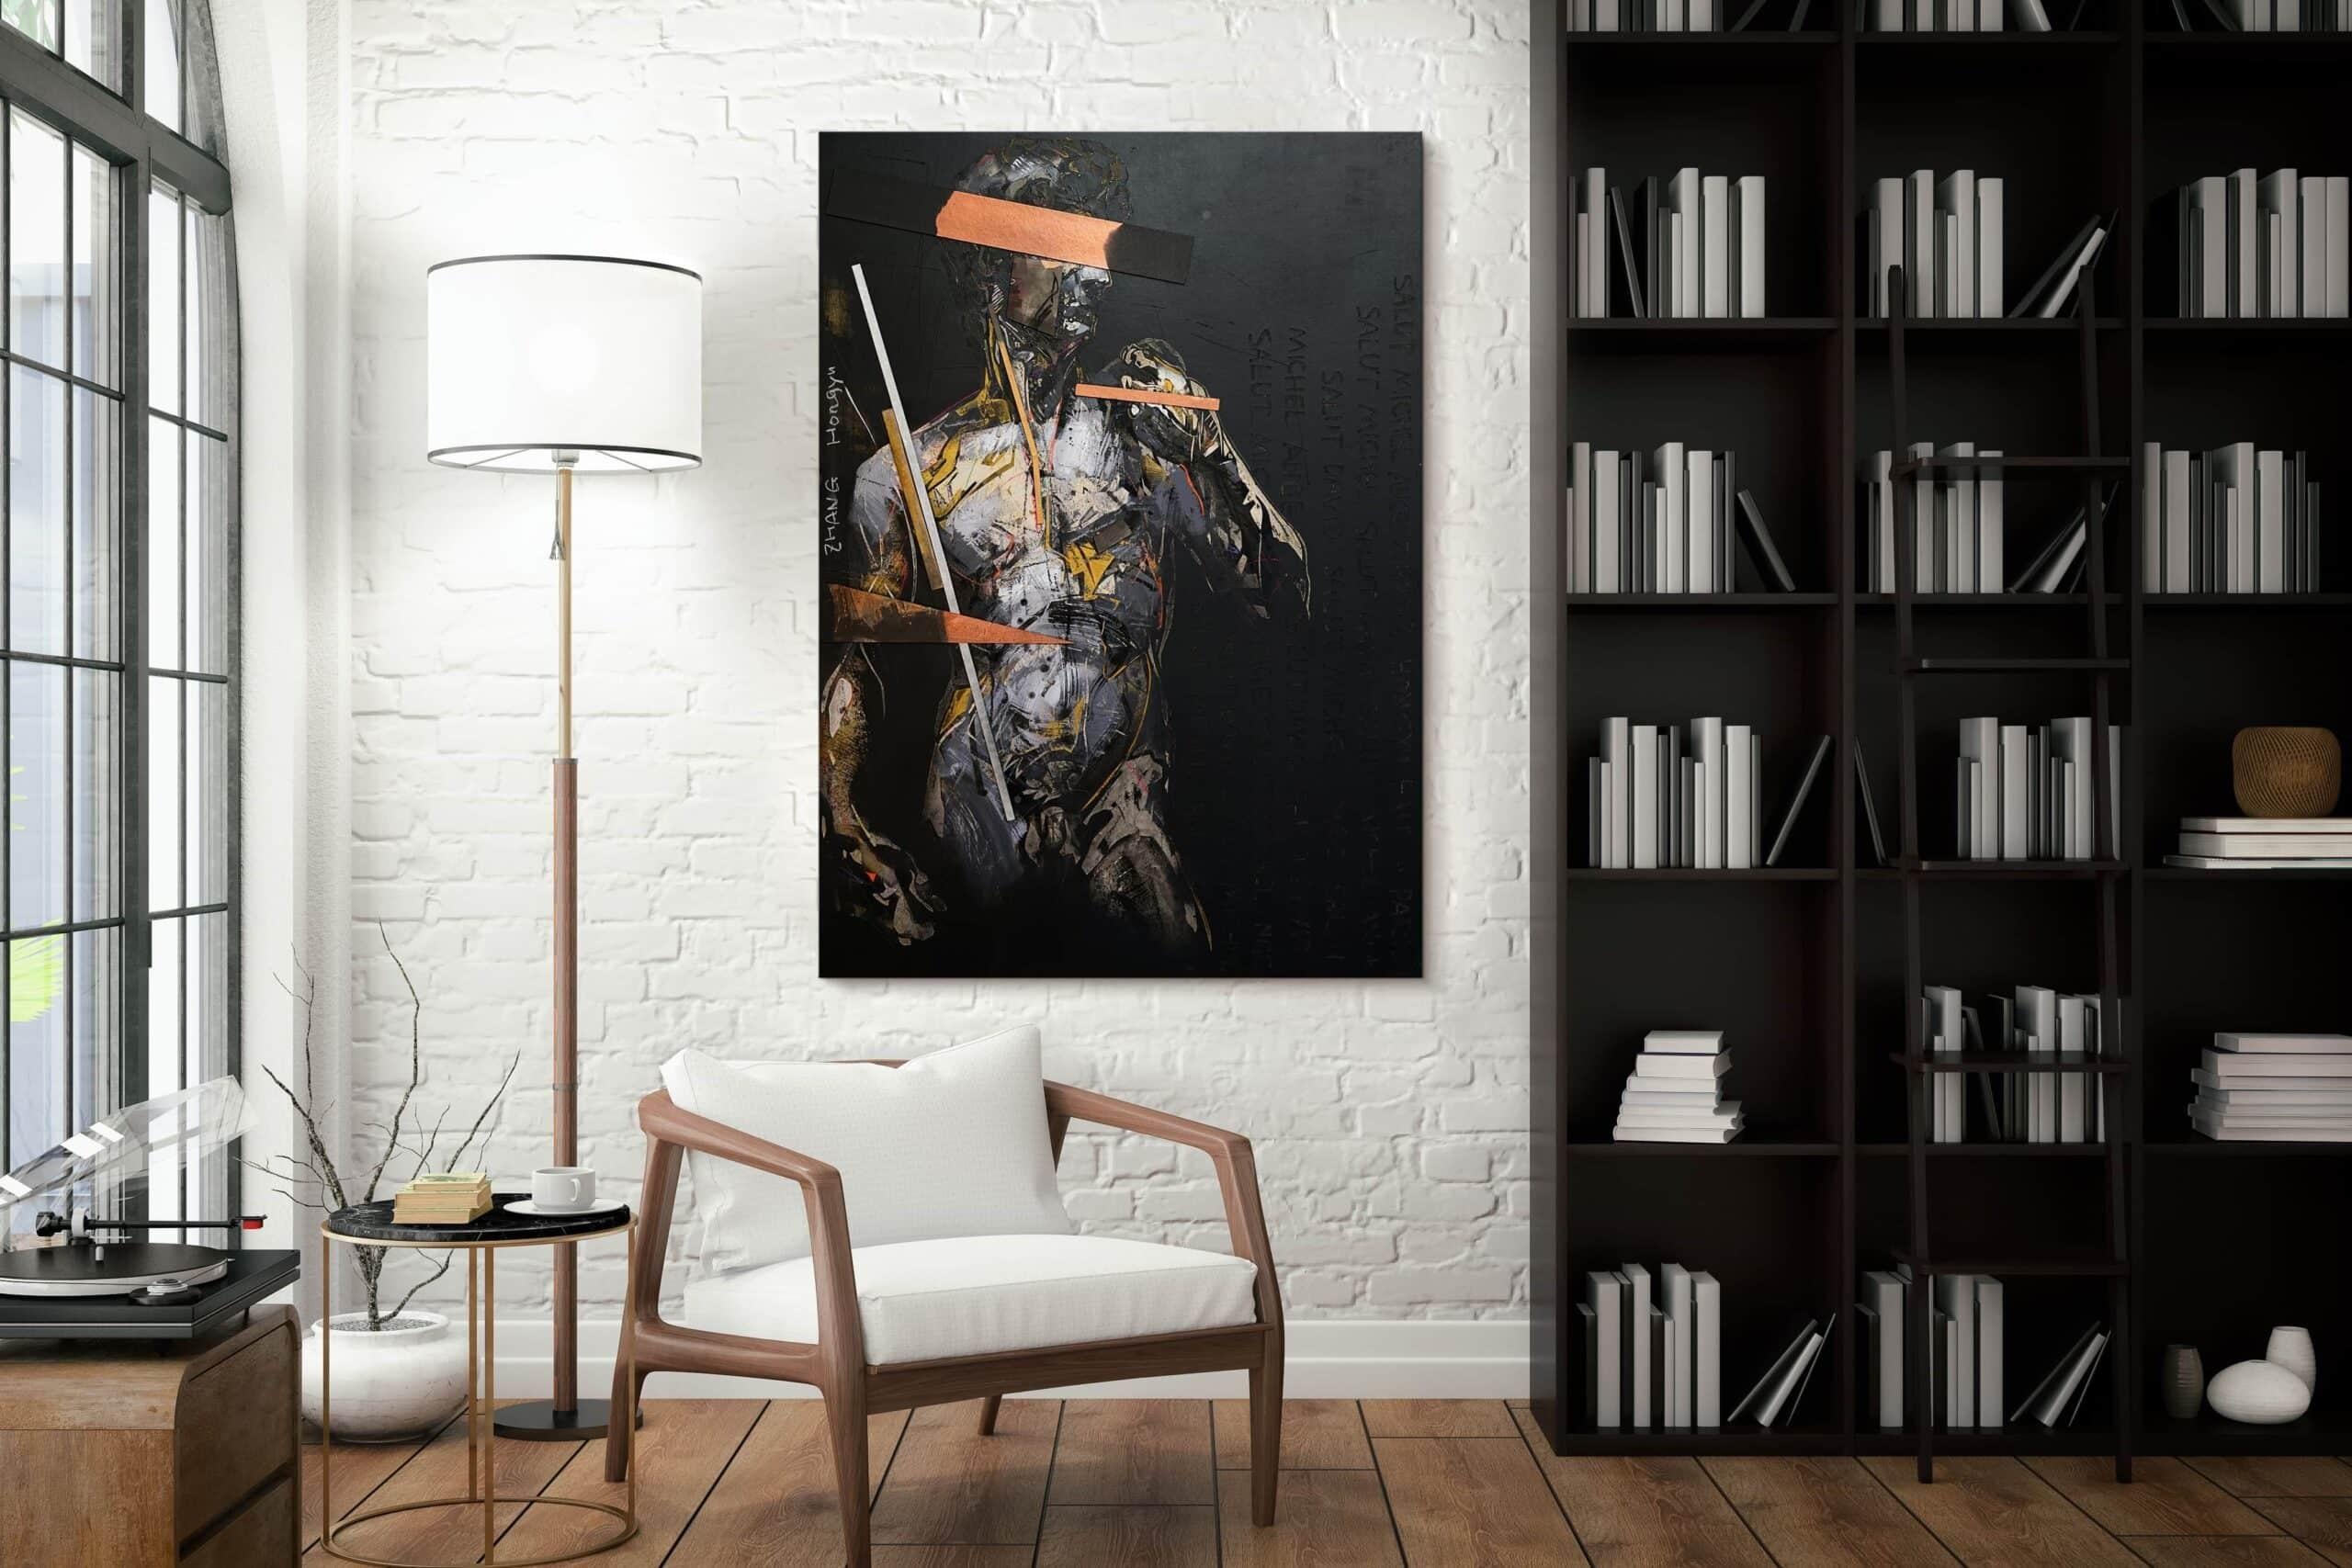 Tribute to Michelangelo III is a unique painting by contemporary artist Hongyu Zhang. The painting is made with Indian ink, pastel, acrylic, engraving and collage on cardboard mounted on canvas, dimensions are 140 × 100 cm (55.1 × 39.4 in). 
The